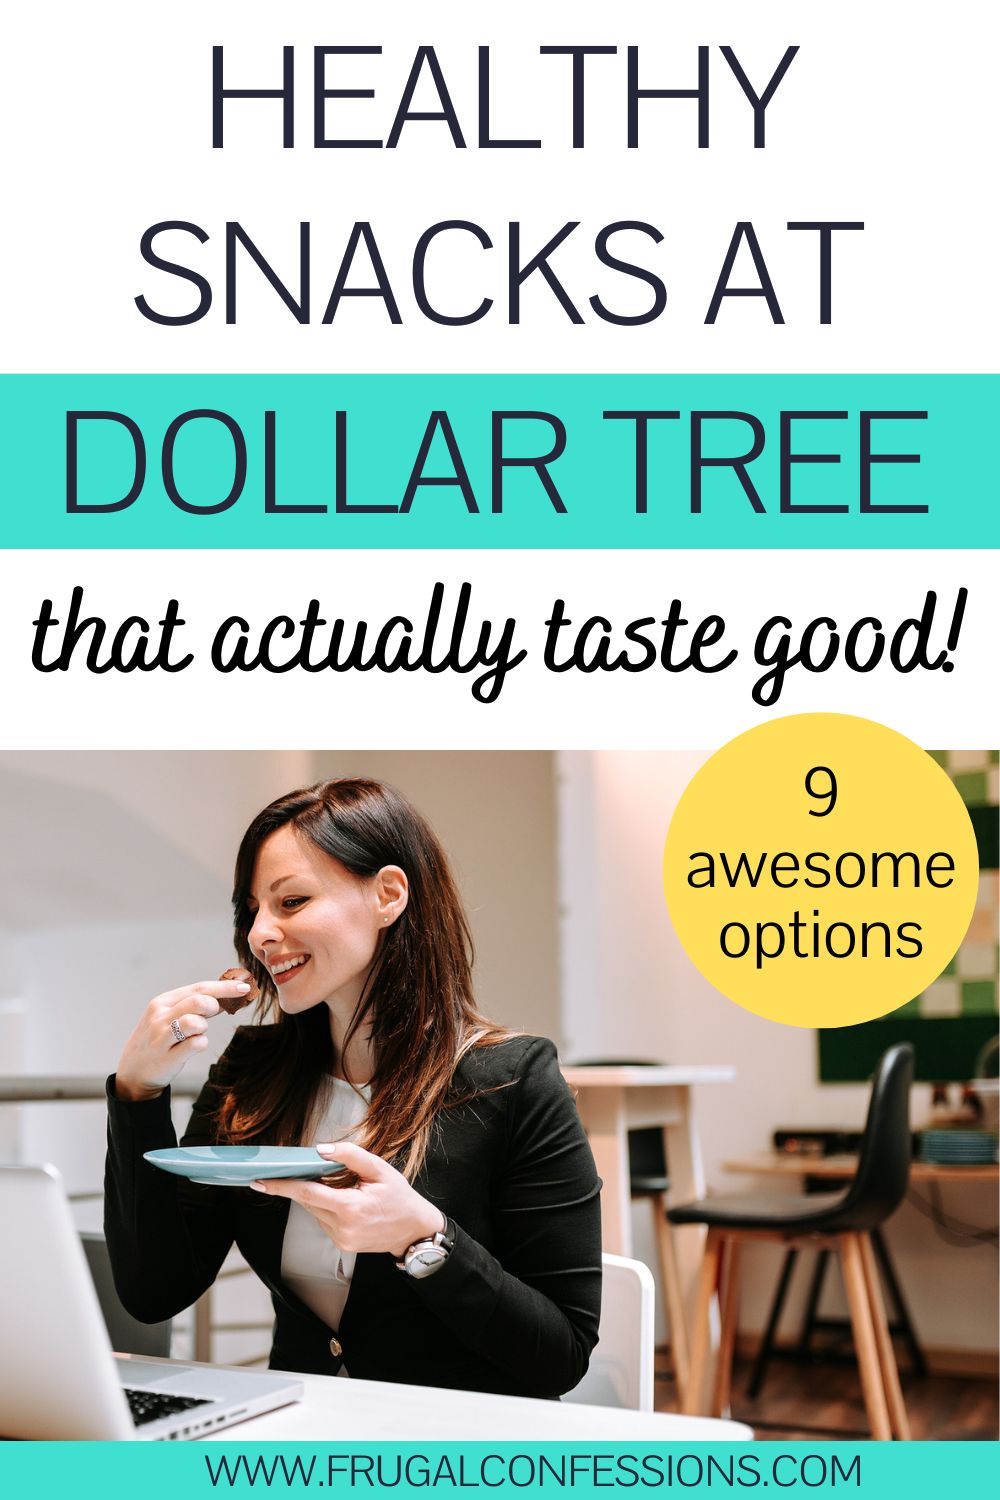 woman at desk eating snack, text overlay "healthy snacks at dollar tree that actually taste good"